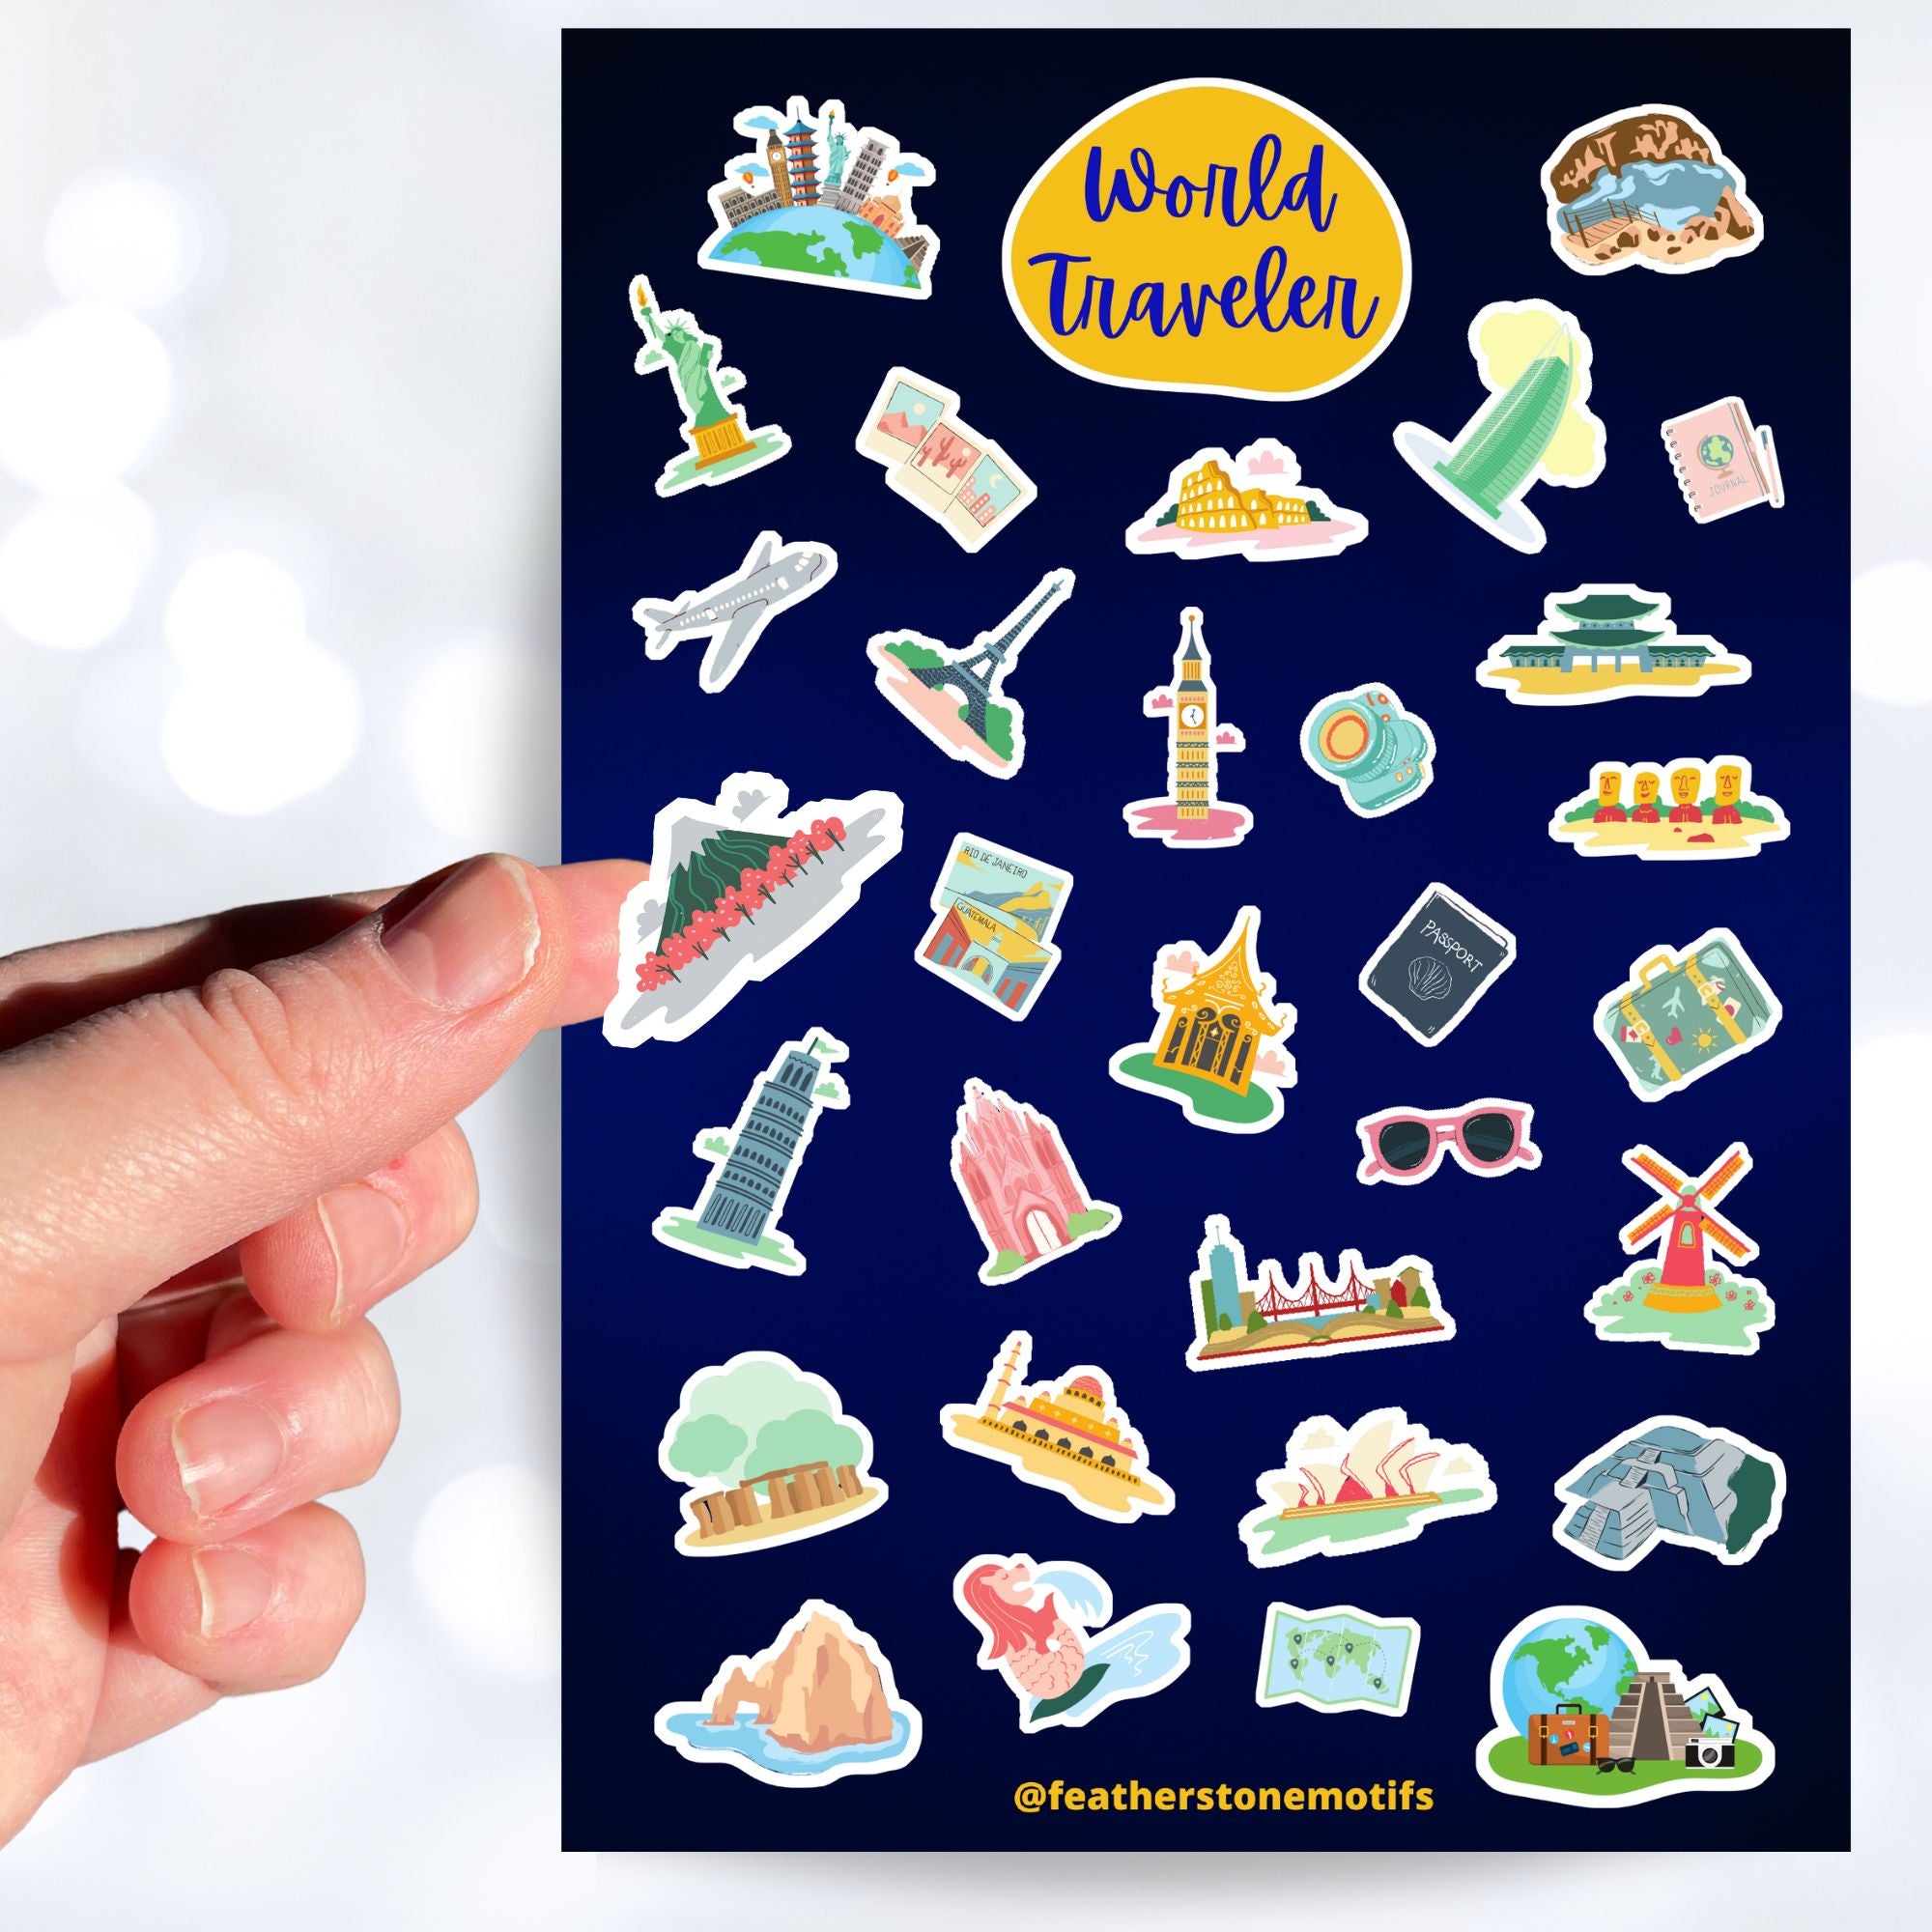 Our World Traveler sticker sheet has sticker images of iconic travel destinations! This sheet has a black background with over 30 different stickers including the Statue of Liberty, Easter Island, Stonehenge, and a passport and camera. This image shows a hand holding a sticker of a mountain above the sticker sheet.